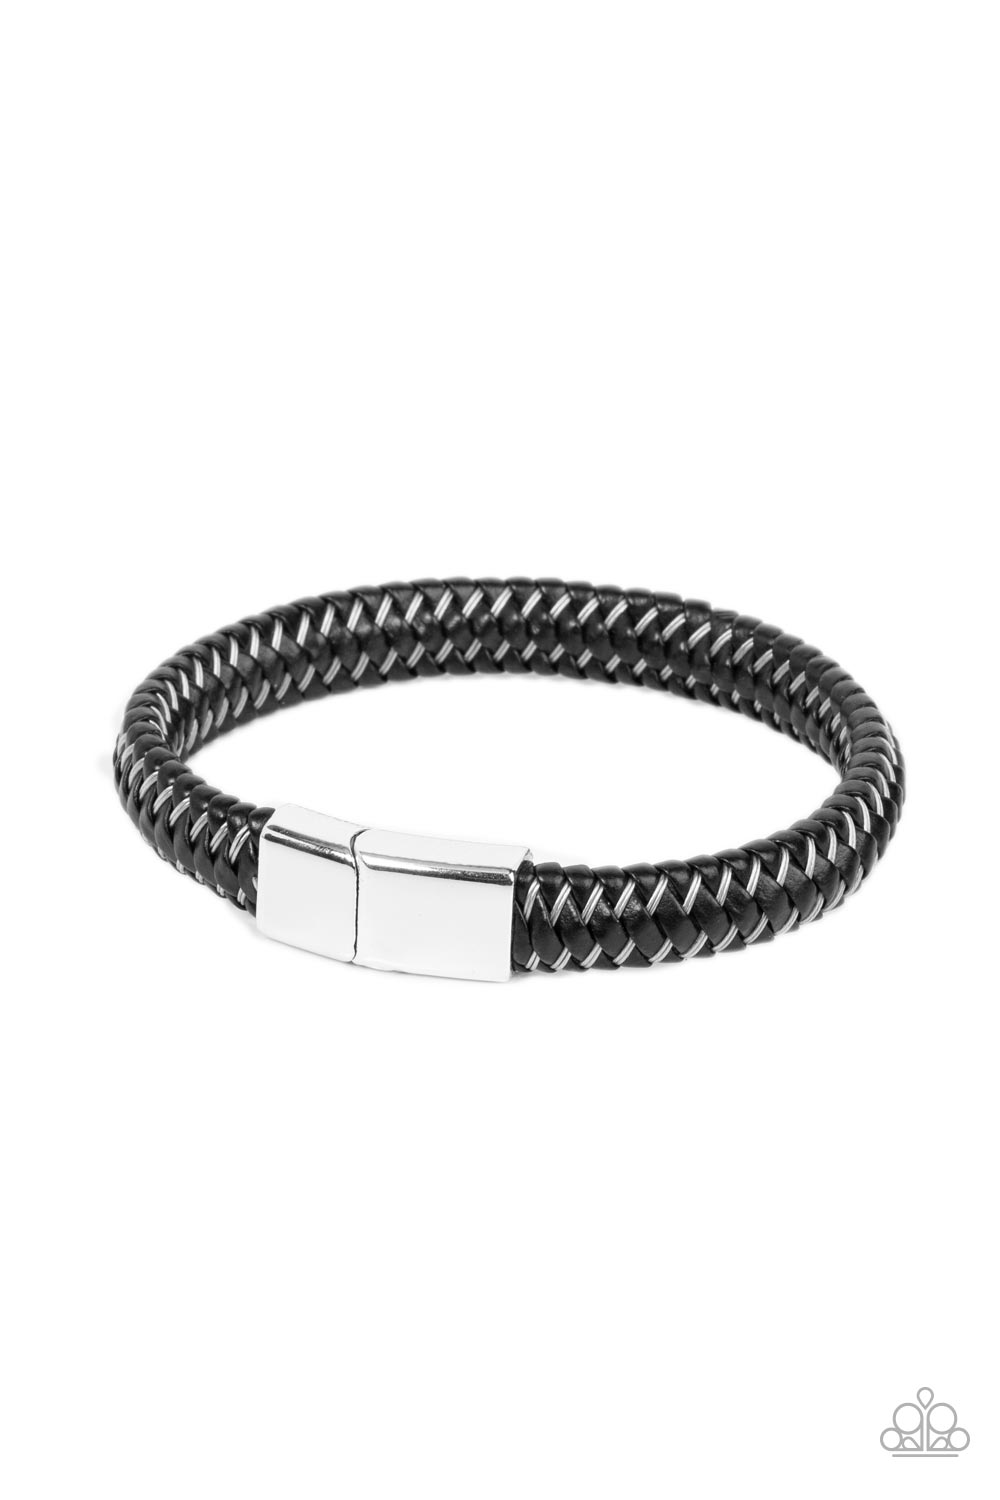 HAUTE-breaker Silver Urban Bracelet - Paparazzi Accessories  A shiny collection of silver cording and black leather laces intricately weave around the wrist, invoking an urban vibe. Features a magnetic closure.  Sold as one individual bracelet.